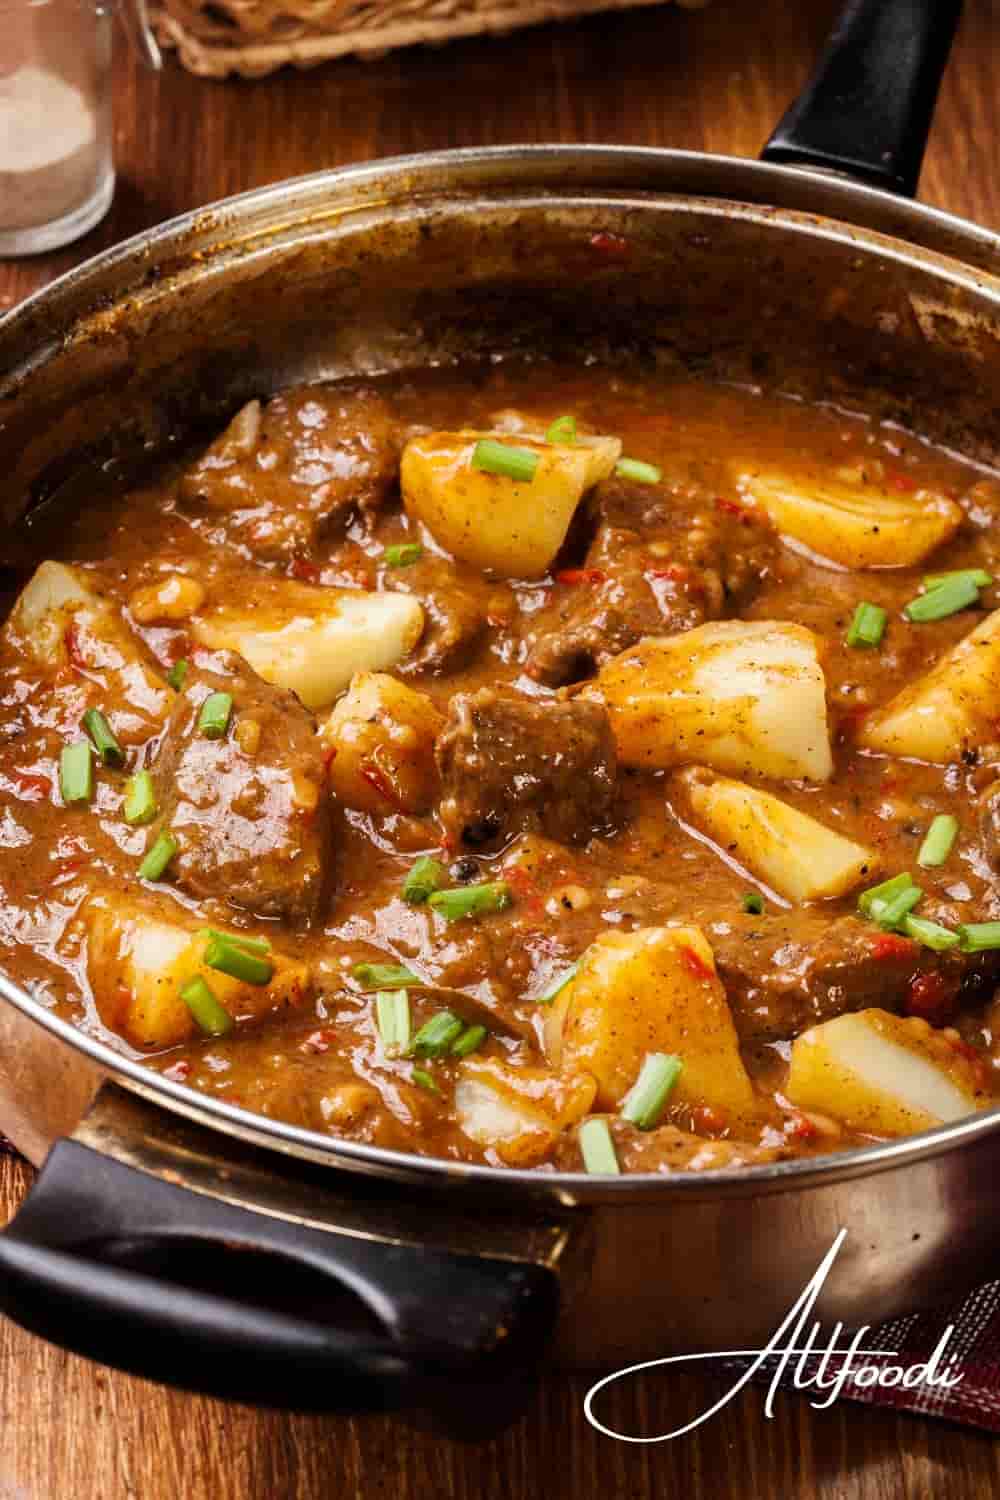 Beef stew without potatoes